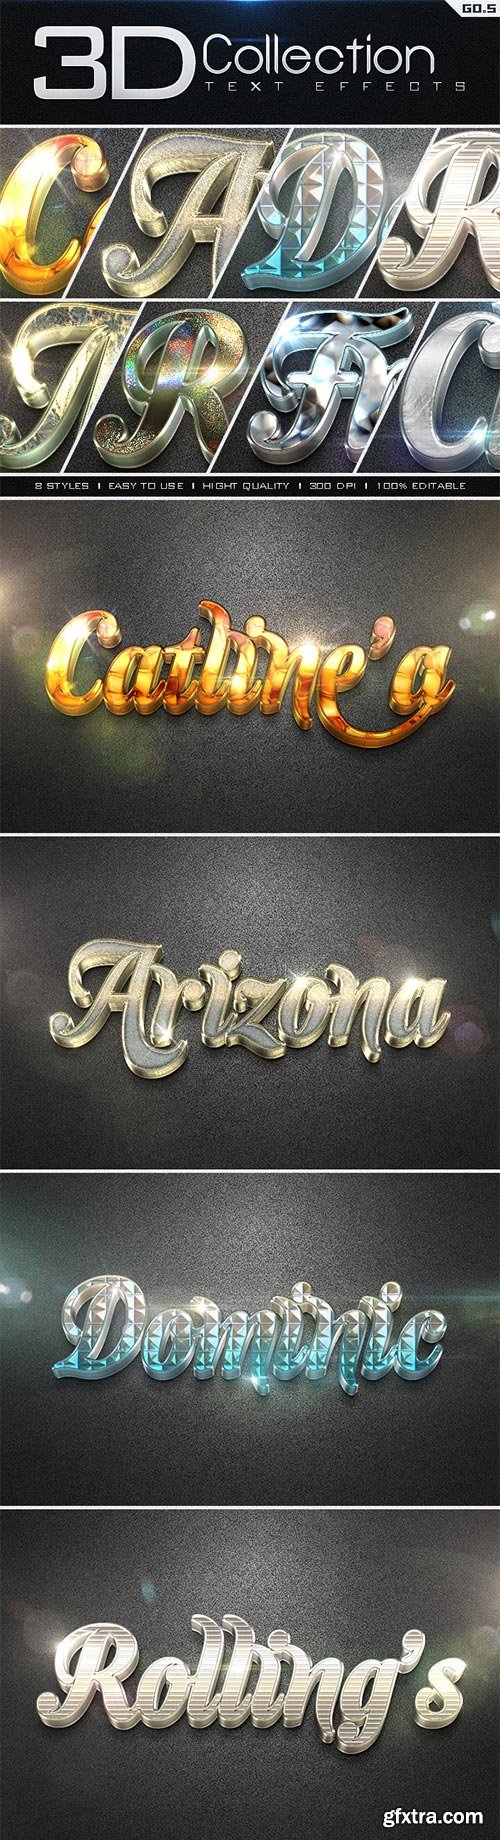 GraphicRiver - 3D Collection Text Effects GO.5